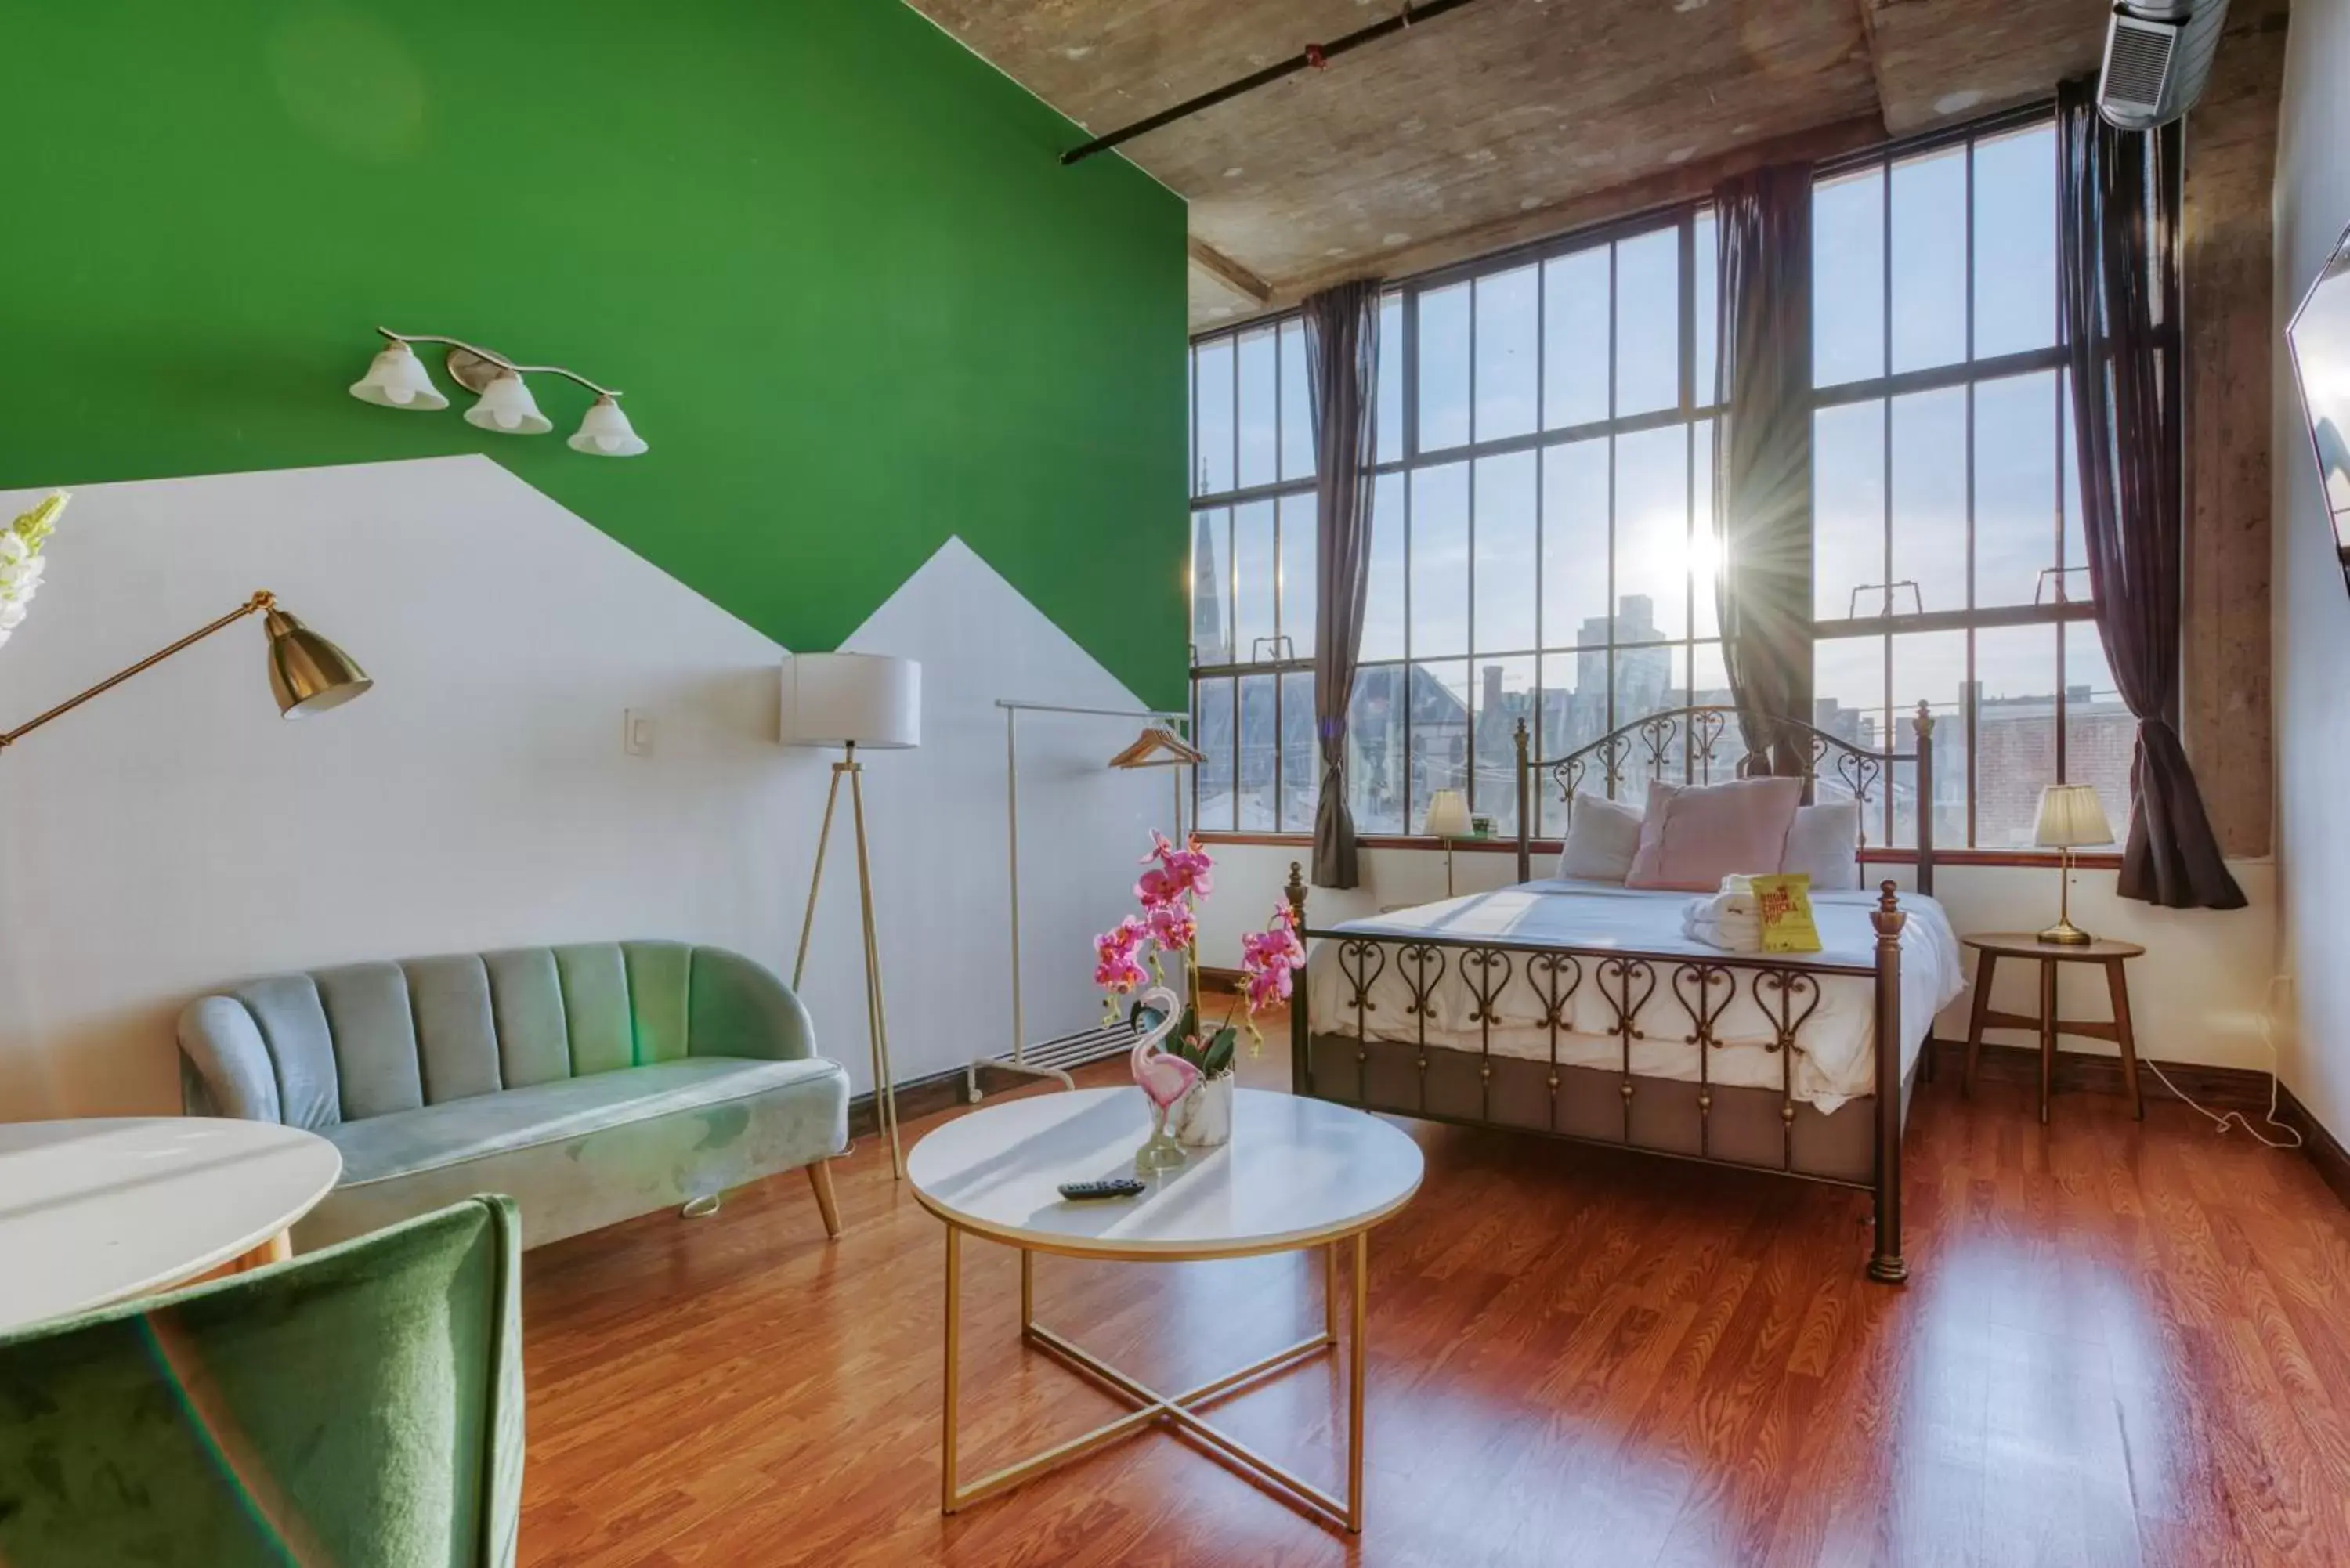 Studio Apartment in Sosuite at Independence Lofts - Callowhill